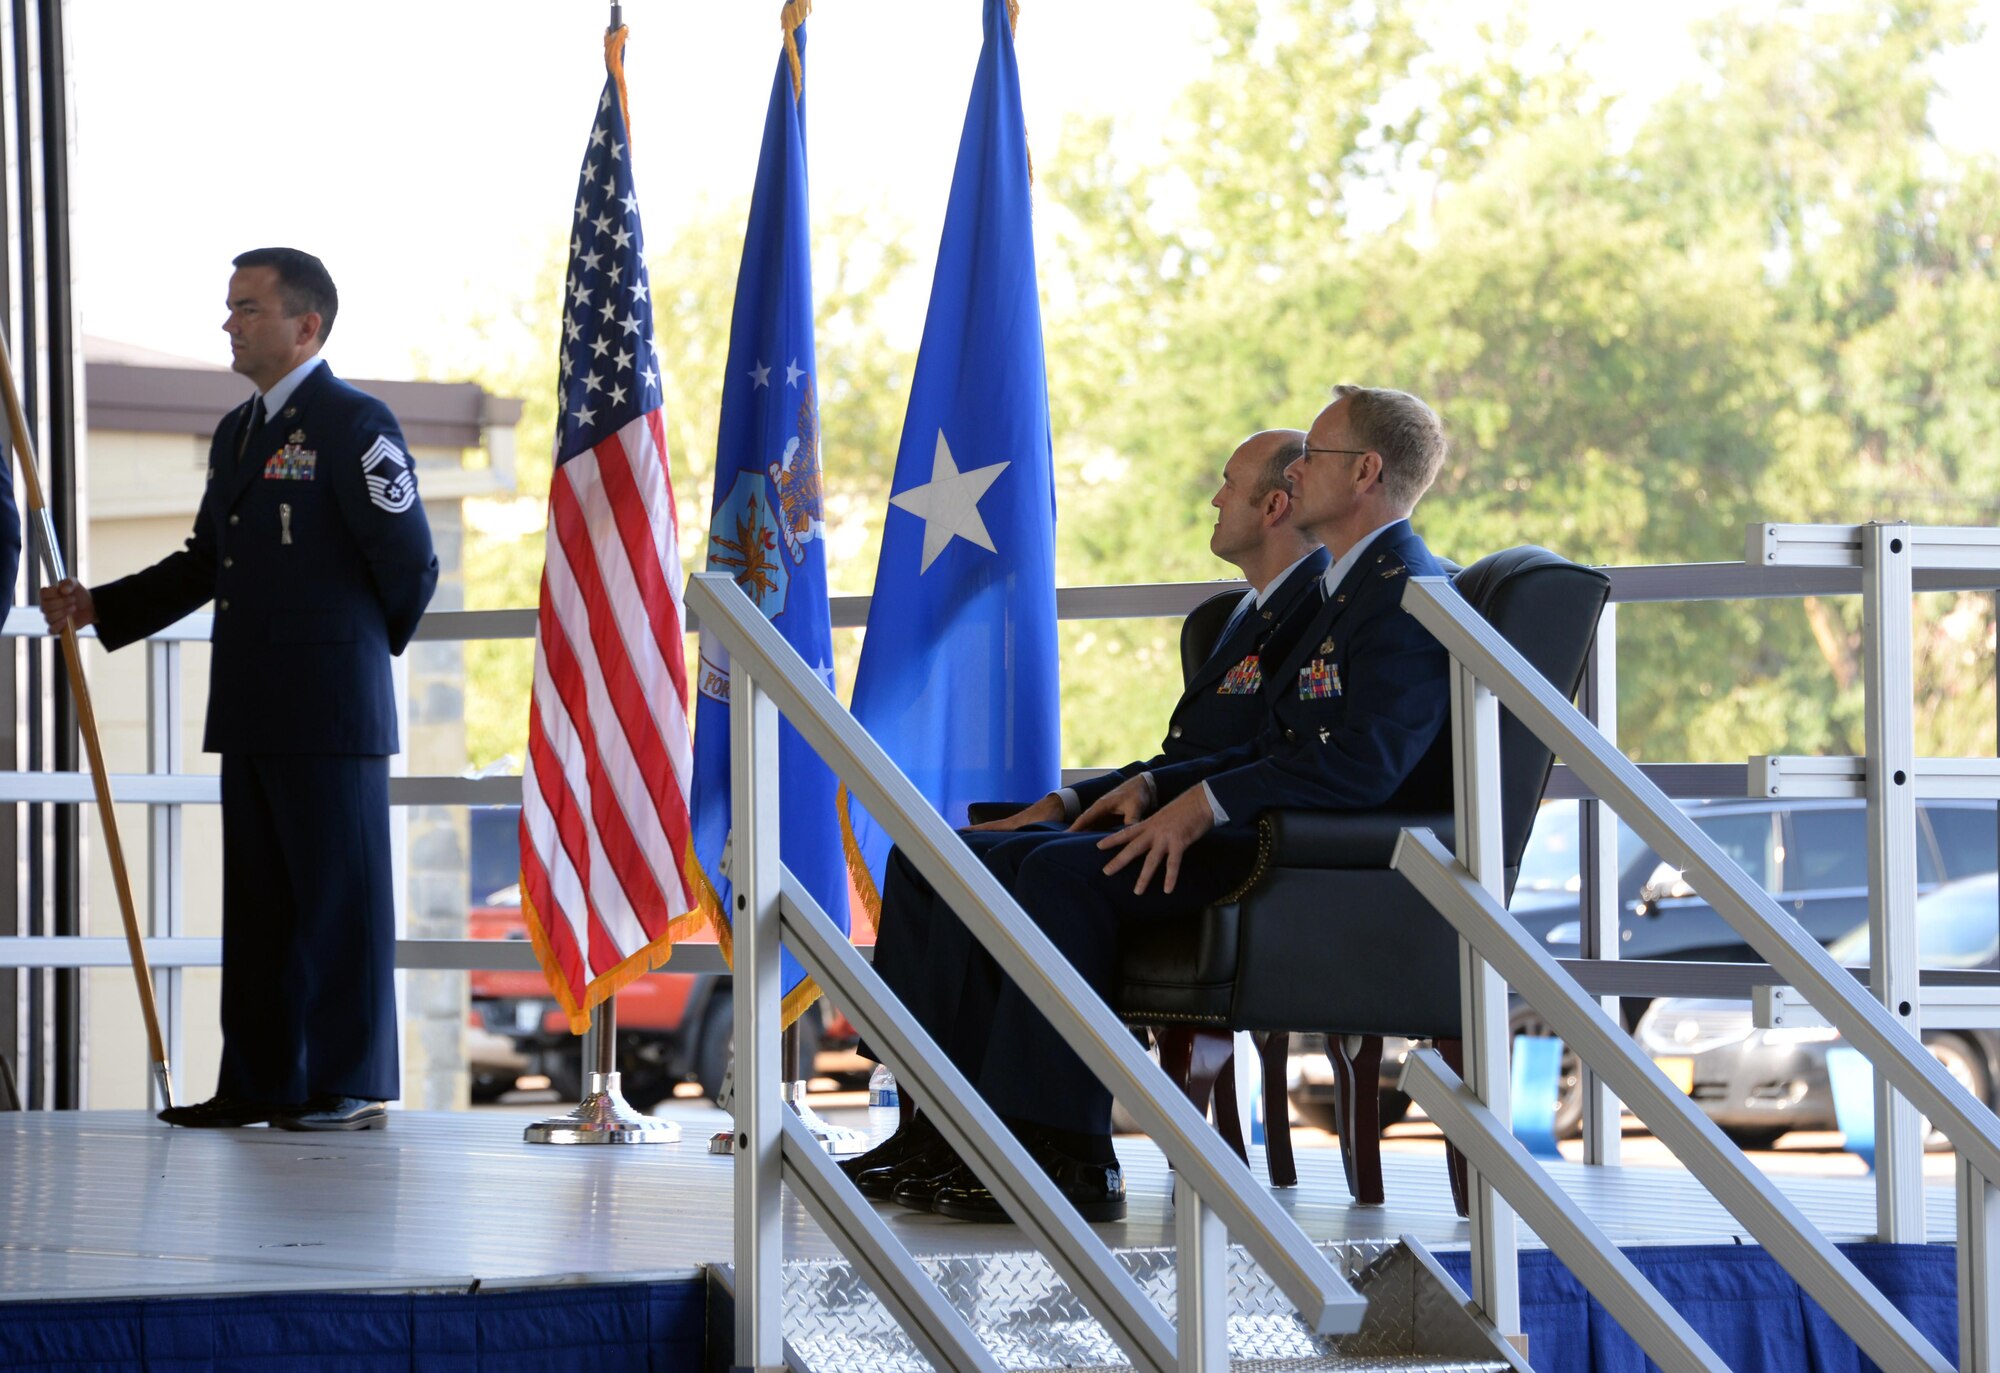 Col. Michael Donahue assumes command of the 82nd Training Group, July 17, 2017. (U.S. Air Force photo by Senior Airman Robert L. McIlrath)